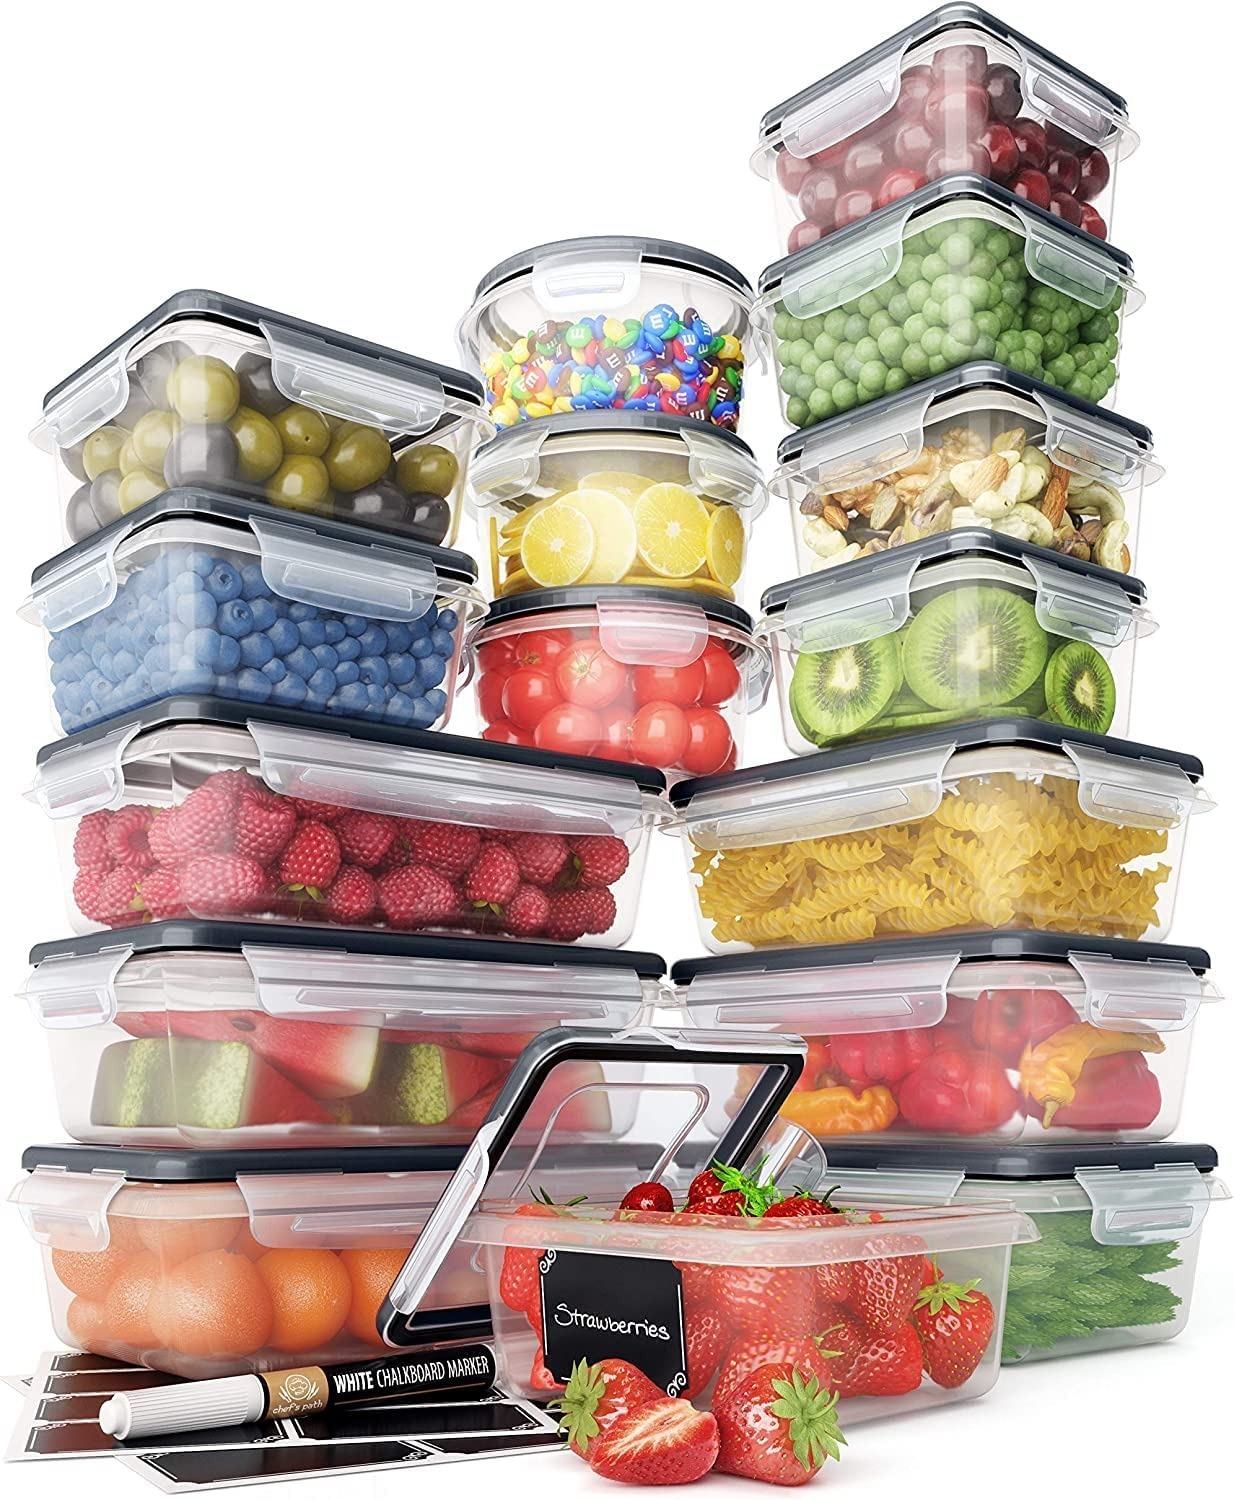 Food storage containers with lids - Pack of 16 Tupperware set with Reusable Chalkboard Labels and Marker - BPA Free, Dishwasher and microwave safe $29.99 + FS with PRIME